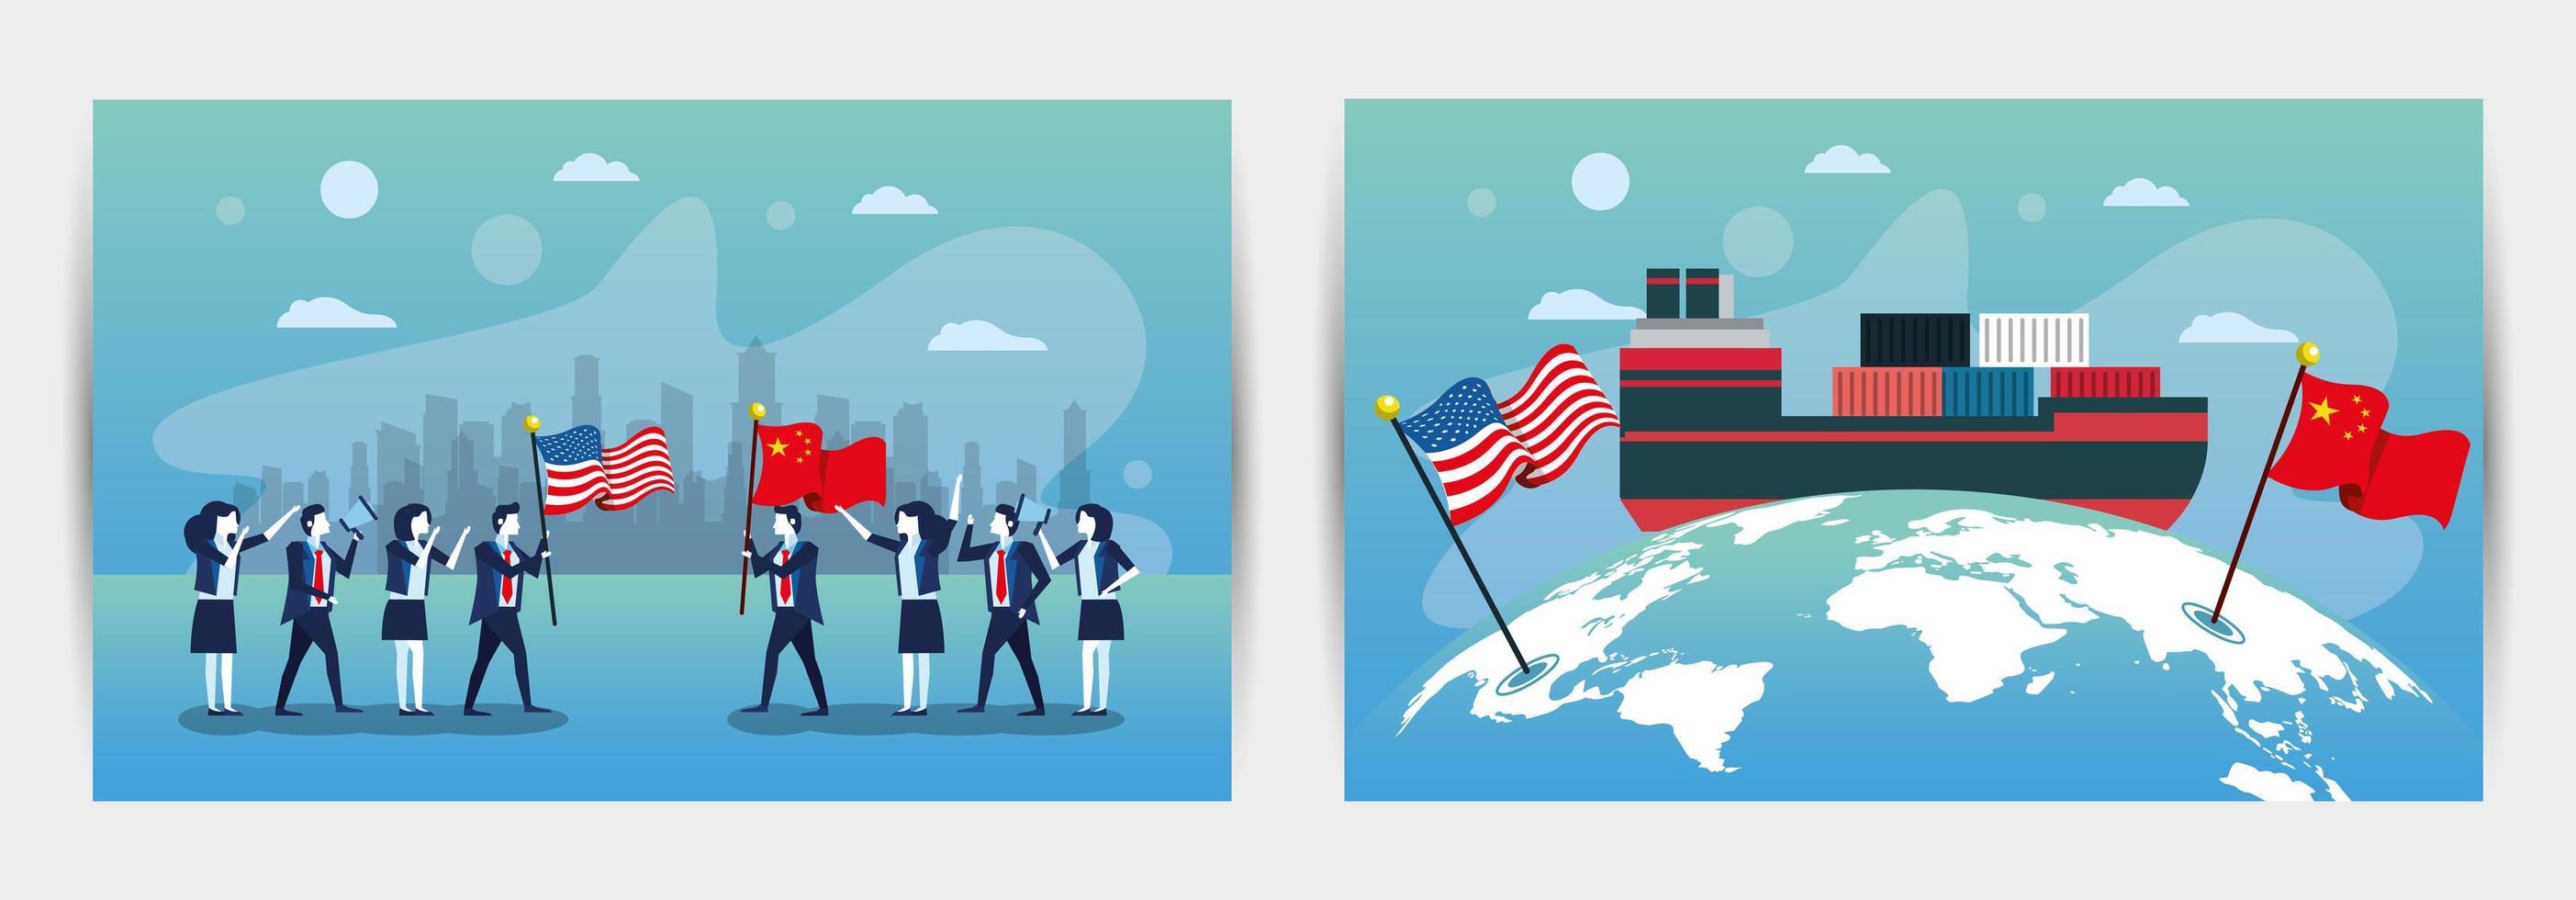 bundle of business people with usa and china flags vector